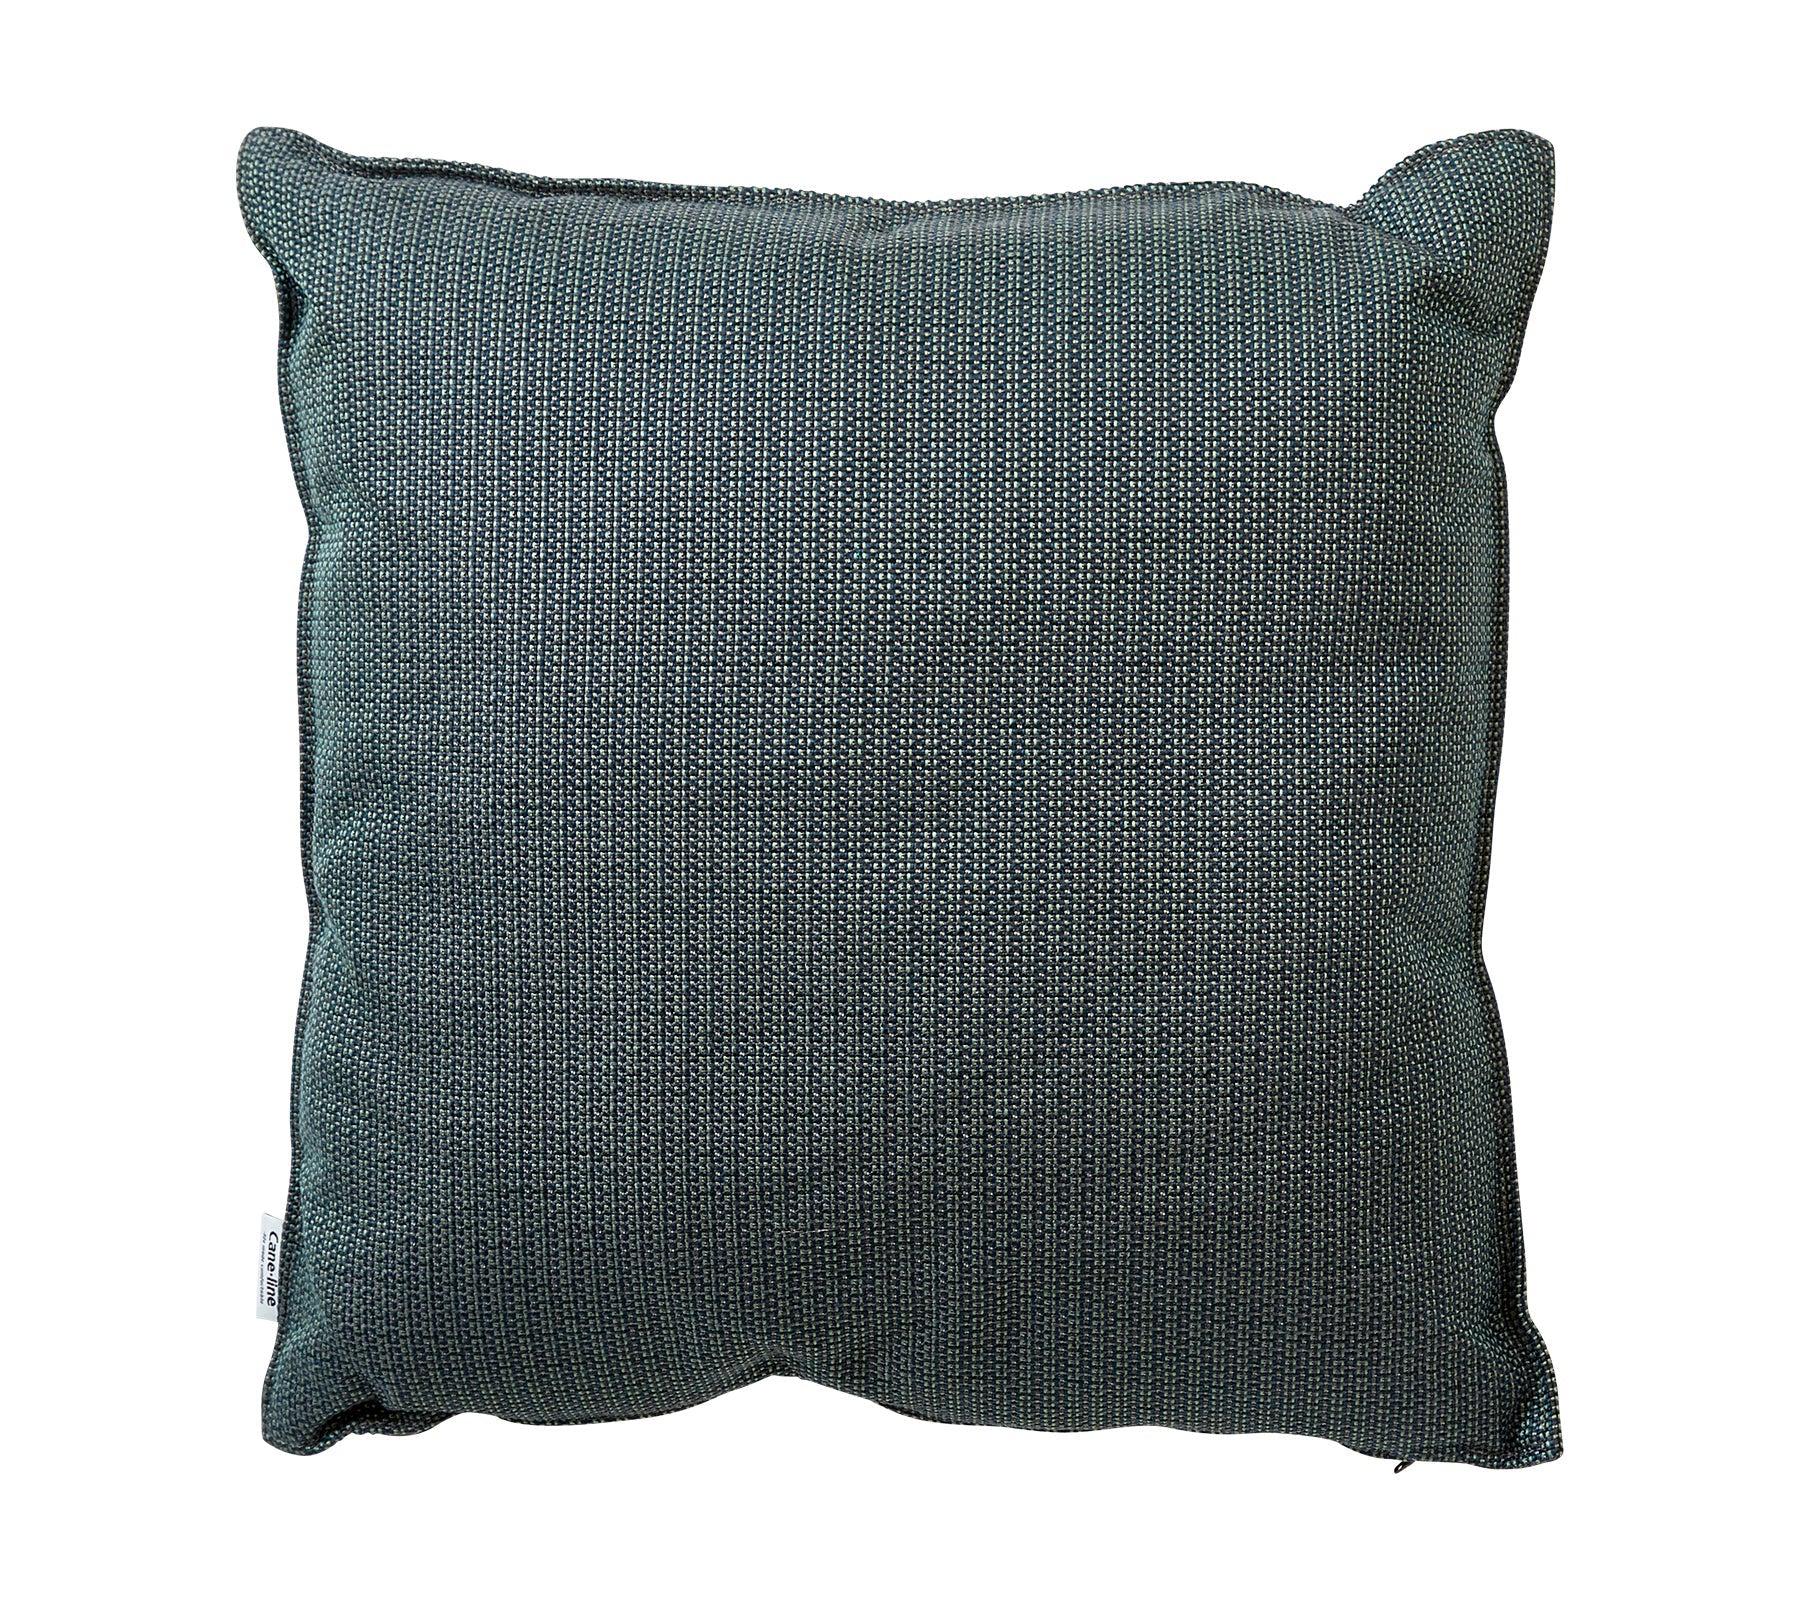 Cane-line Link Scatter Cushion, 50X50X12 Cm